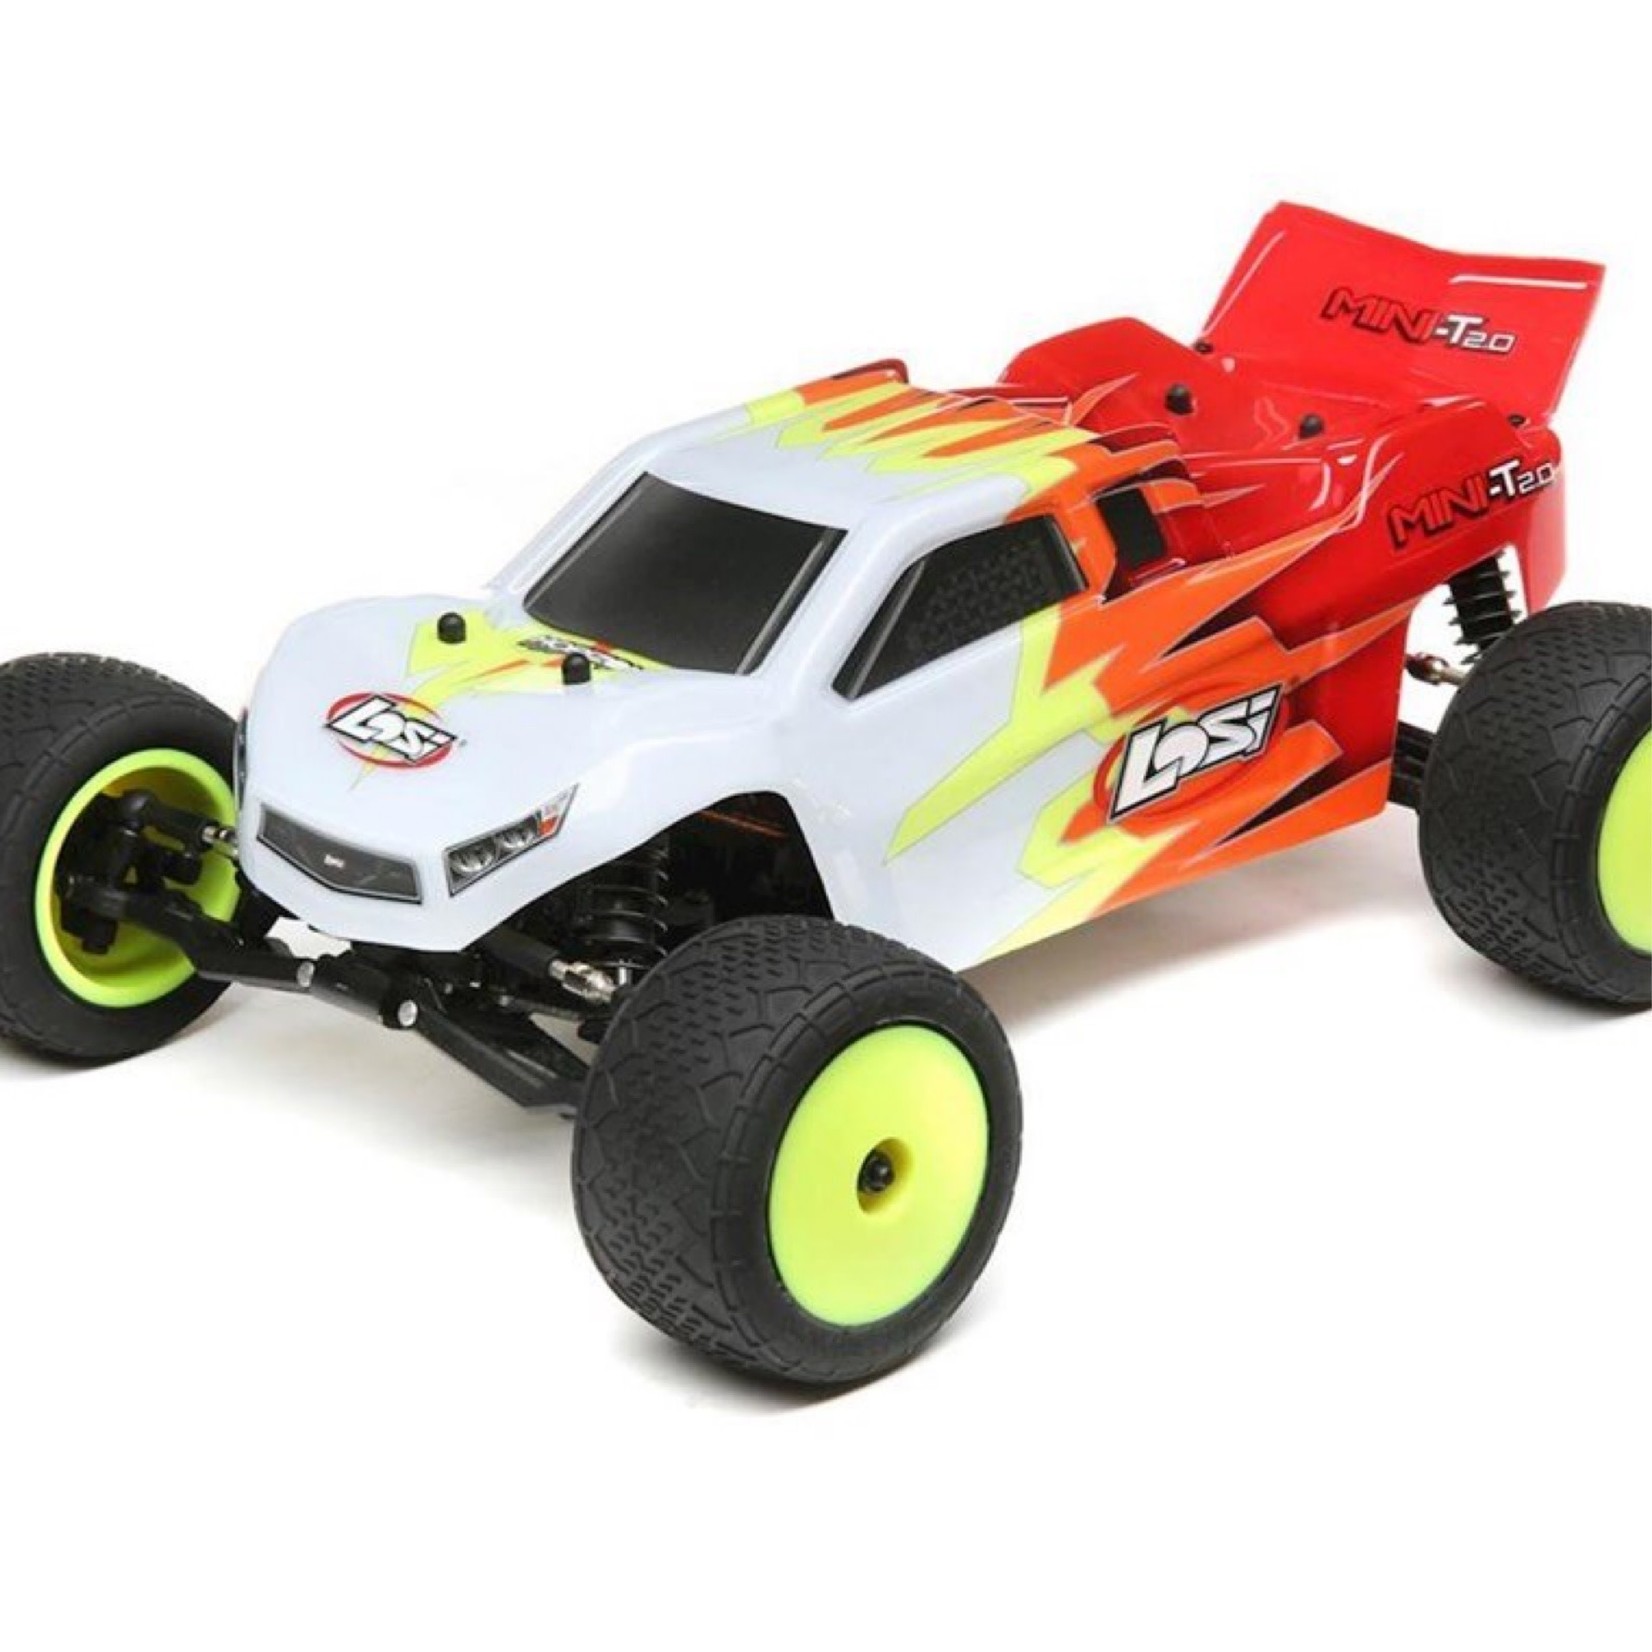 Losi Losi Mini-T 2.0 1/18 RTR 2wd Stadium Truck (Red/White) w/2.4GHz Radio, Battery & Charger #LOS01015T1